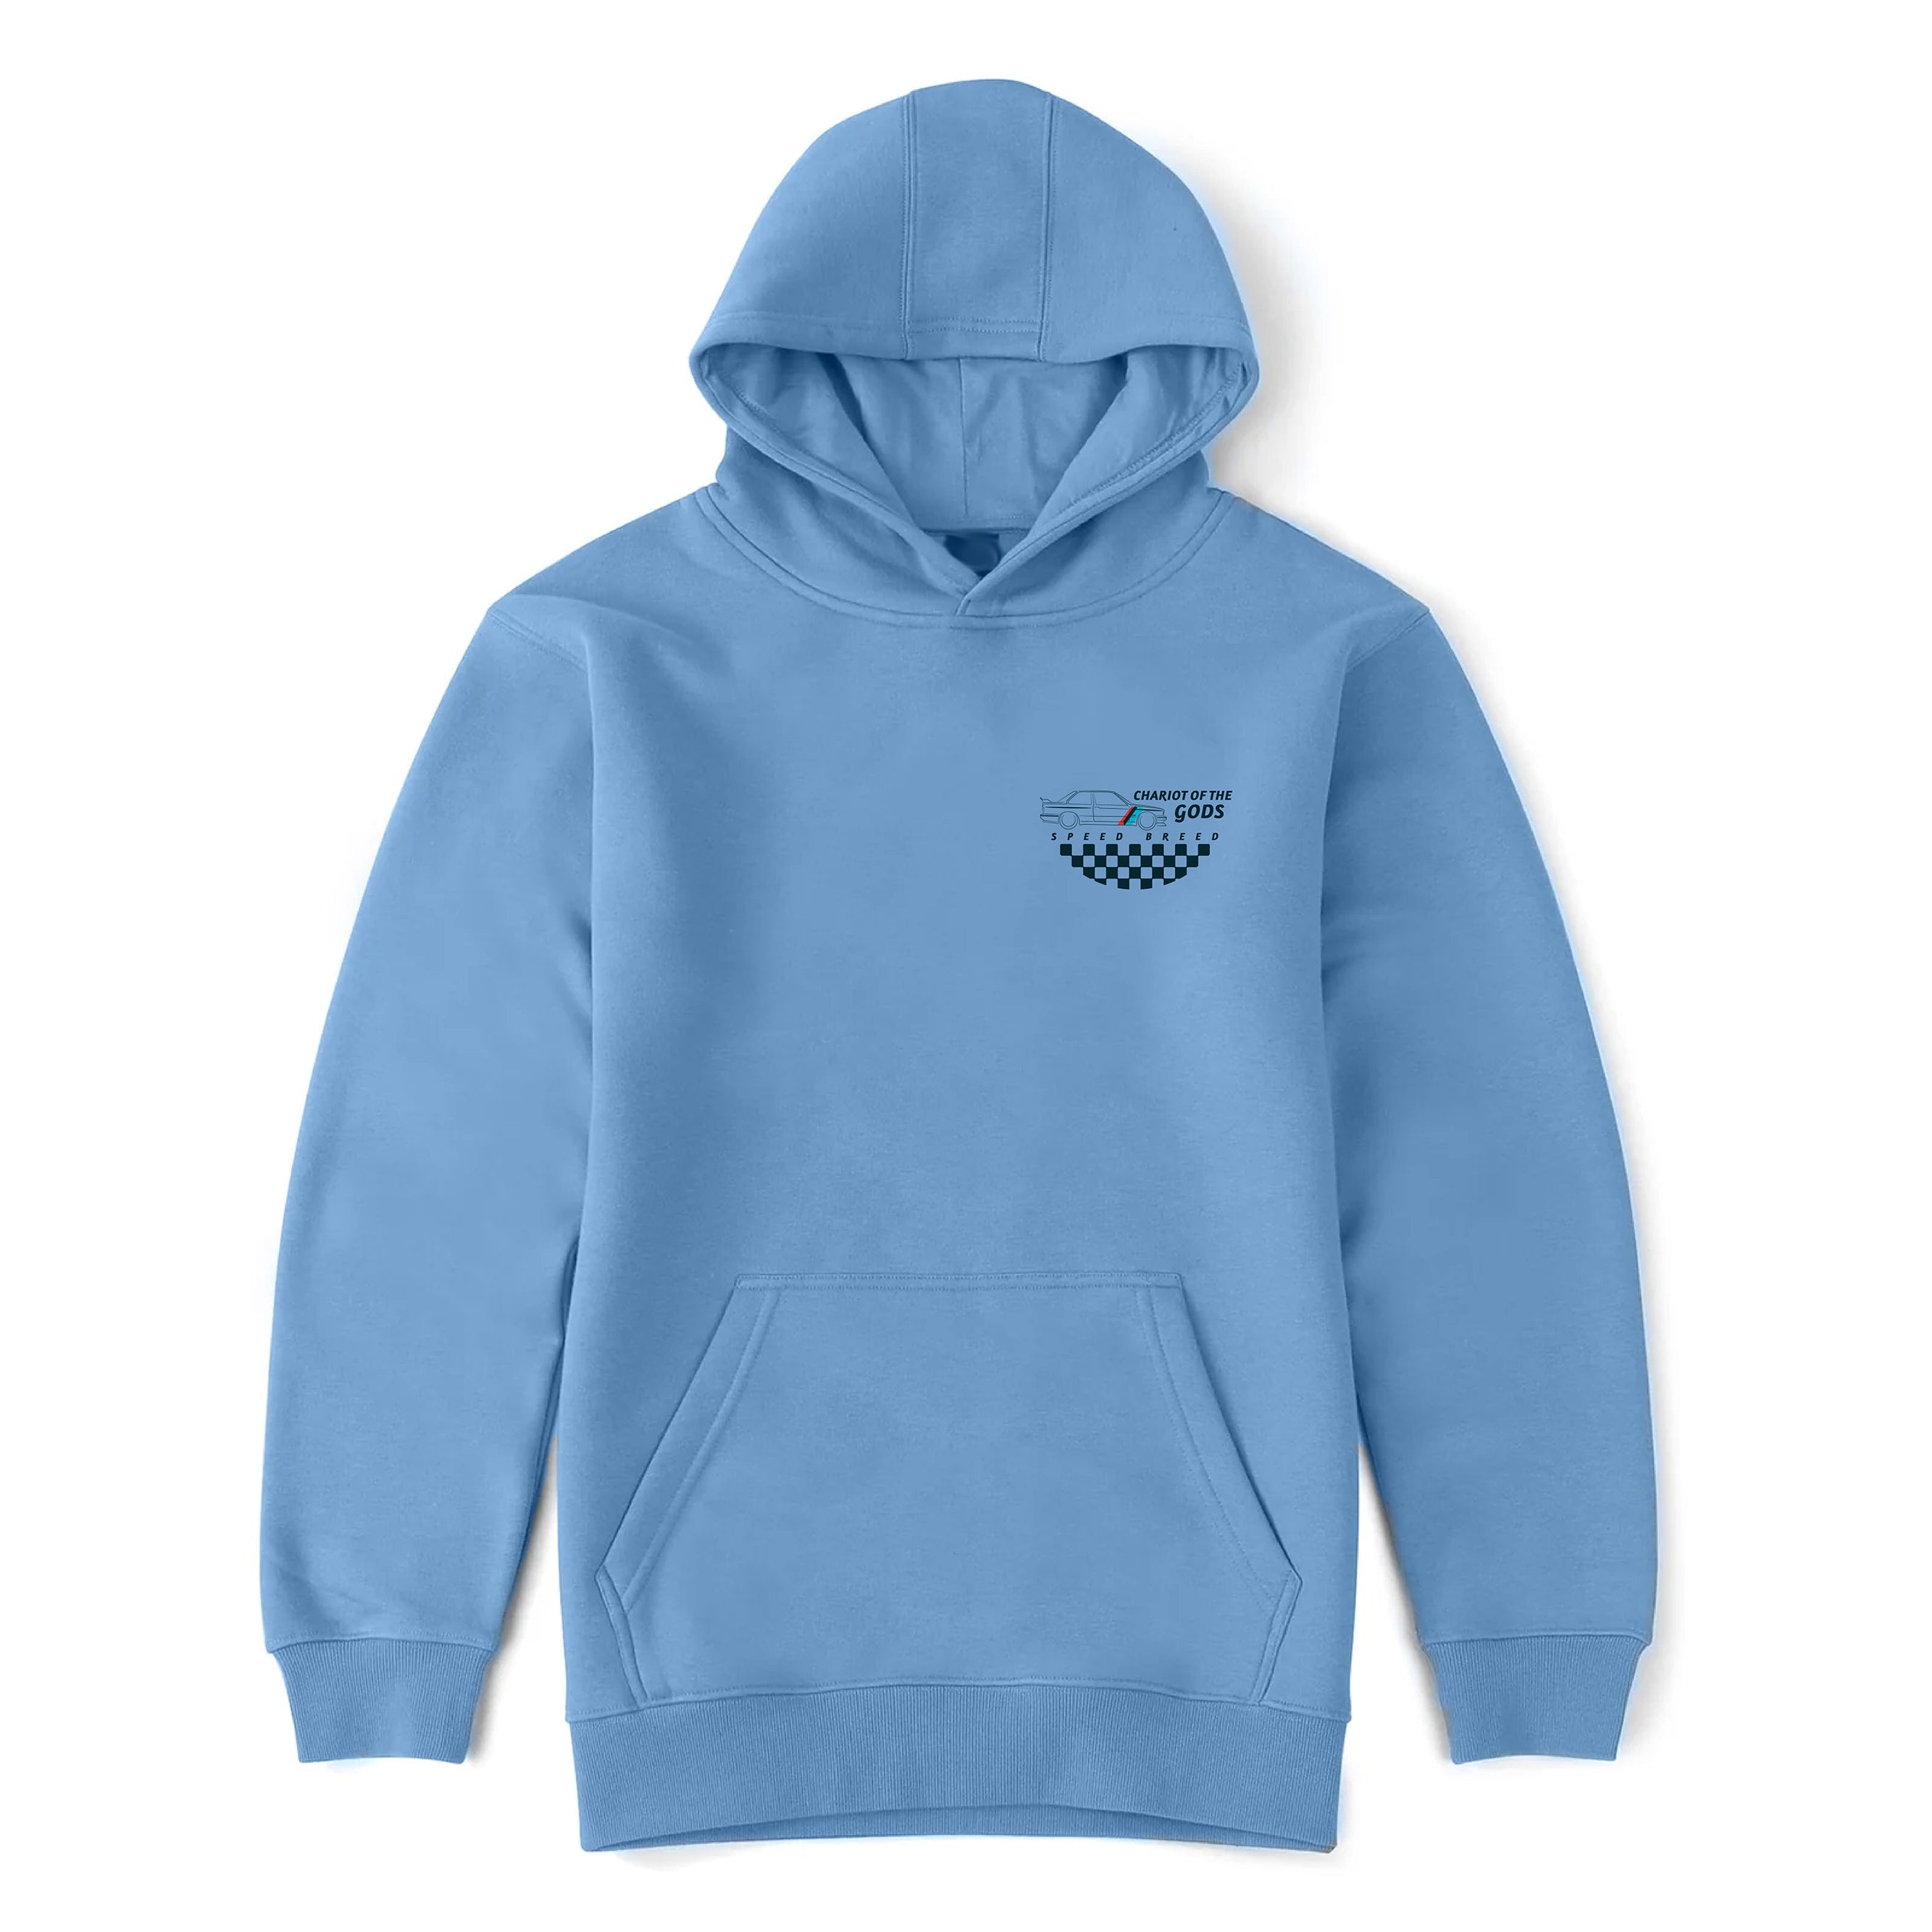 CHARIOT OF THE GODS PREMIUM PULLOVER HOODIE (Cloud Blue)